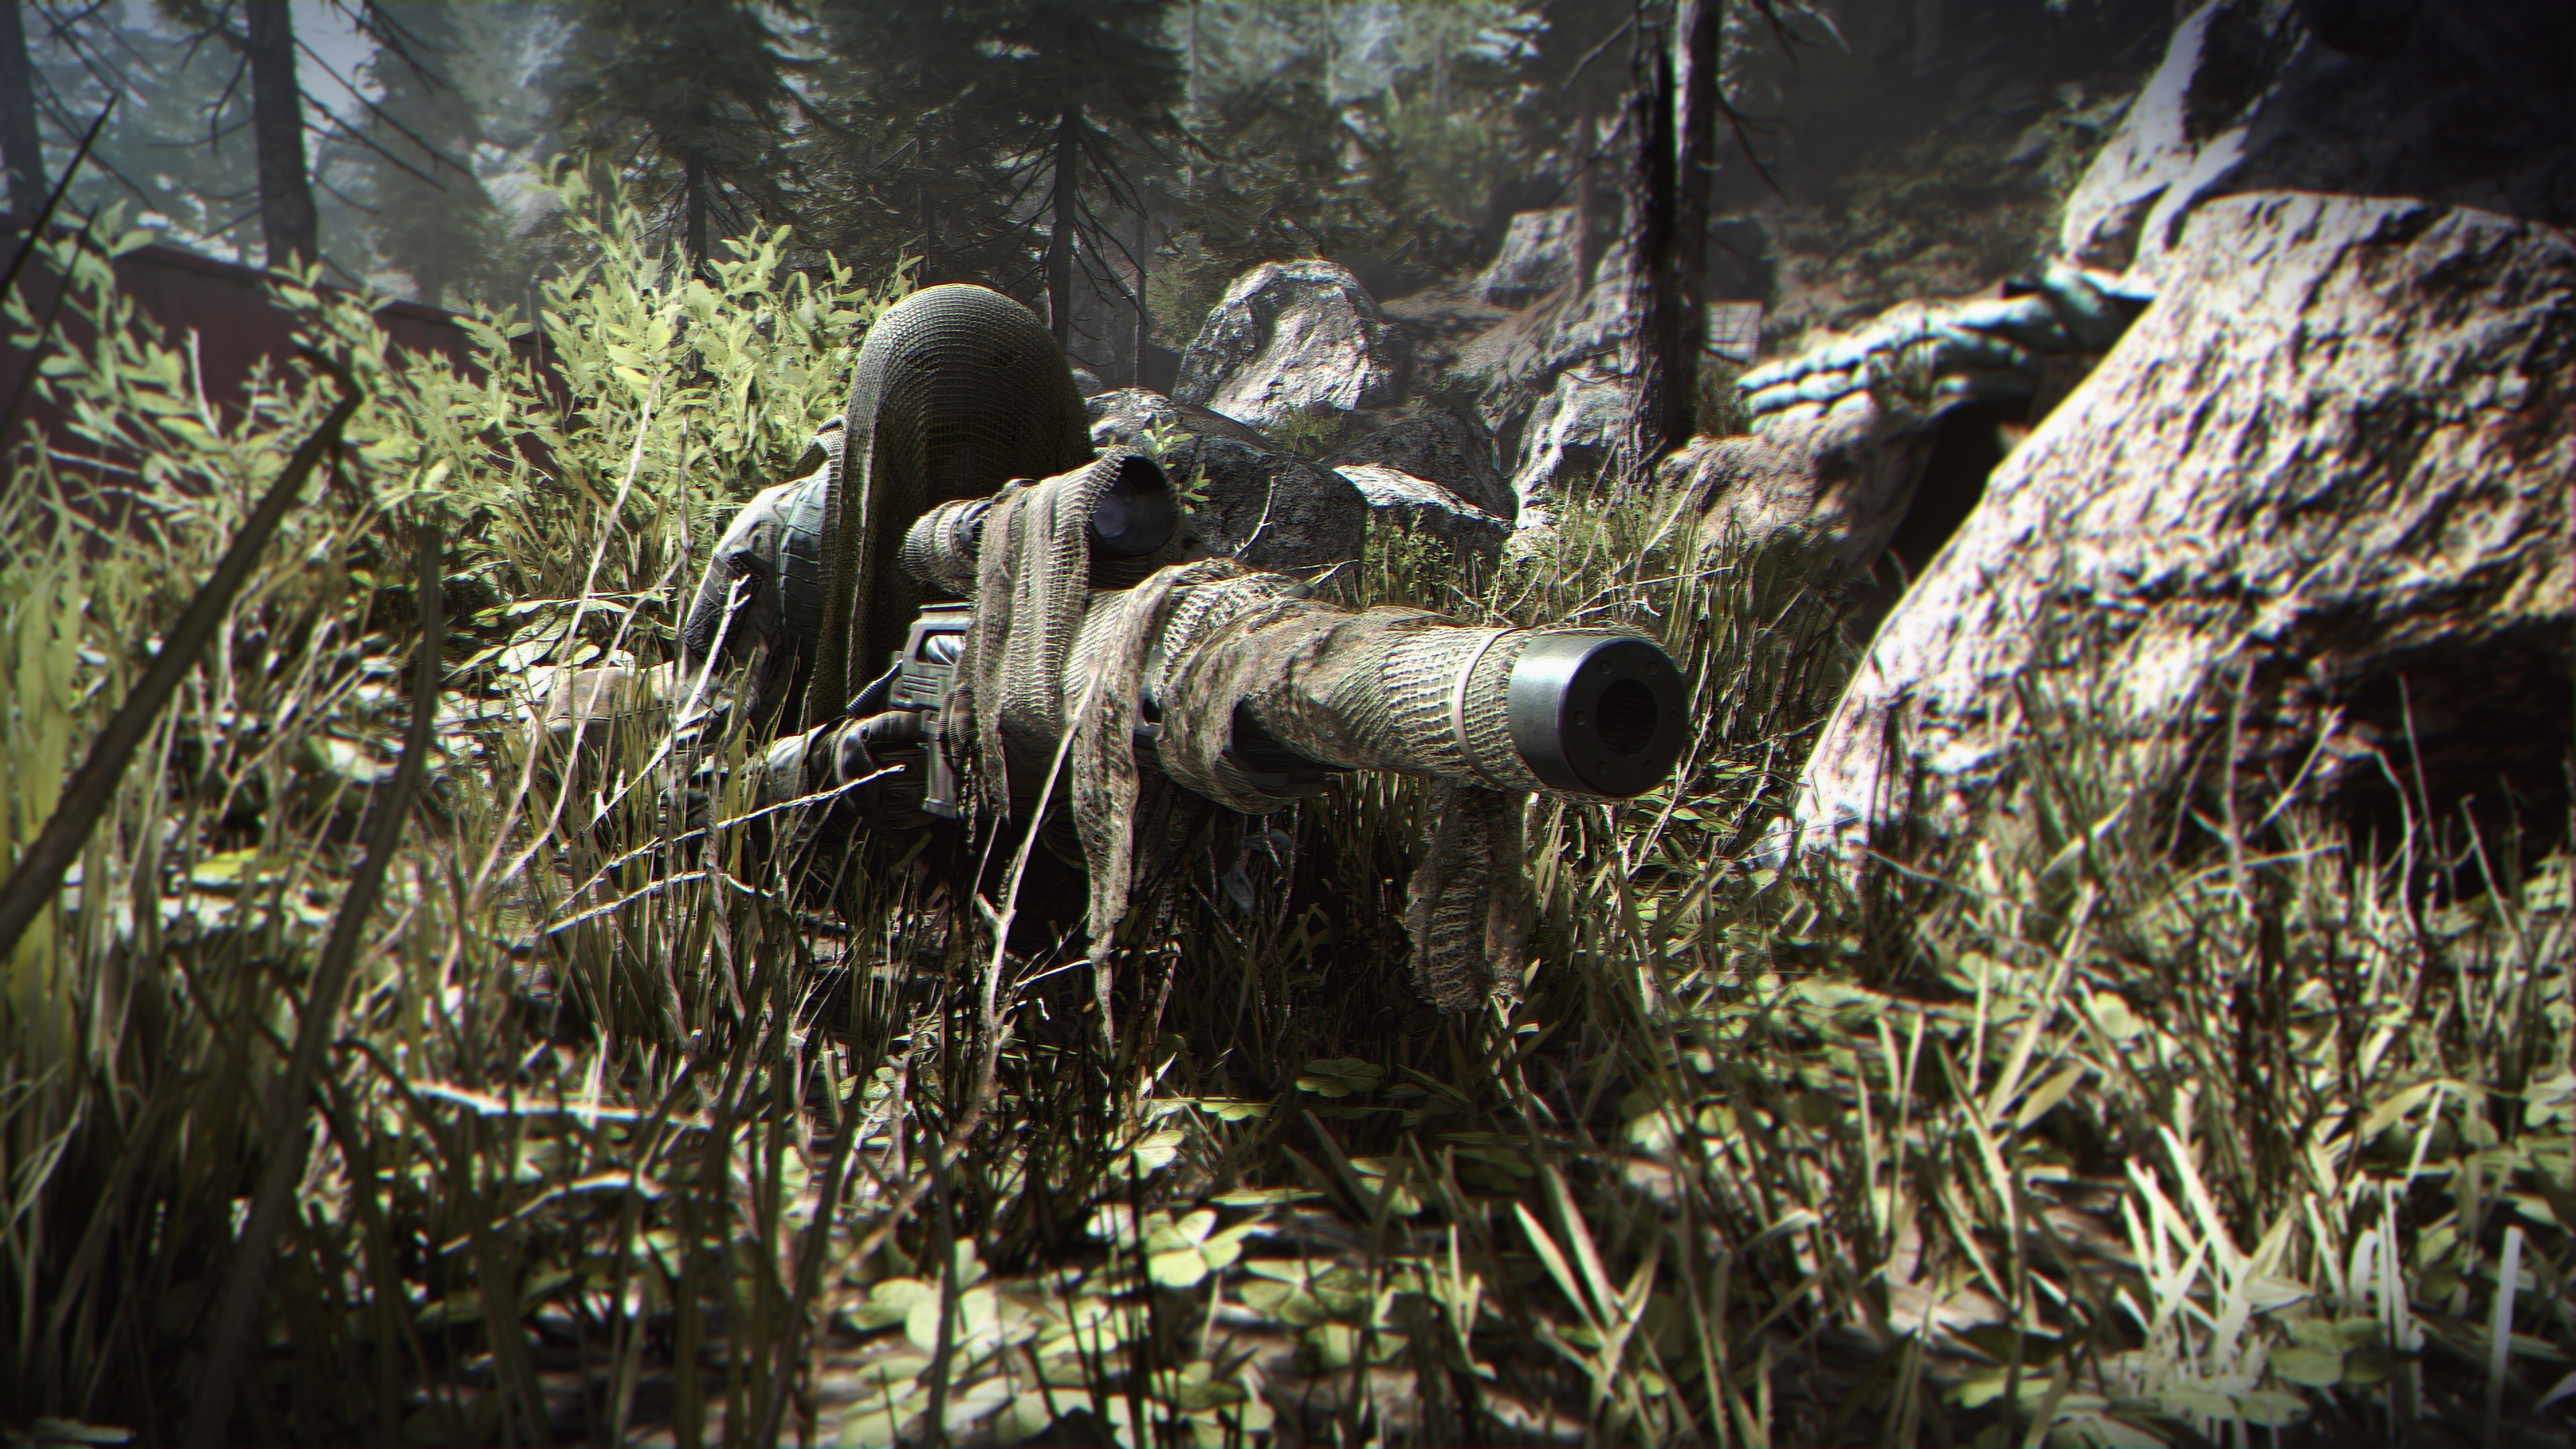 Ilya Maddyson rebukes new Call of Duty that depicts Russians